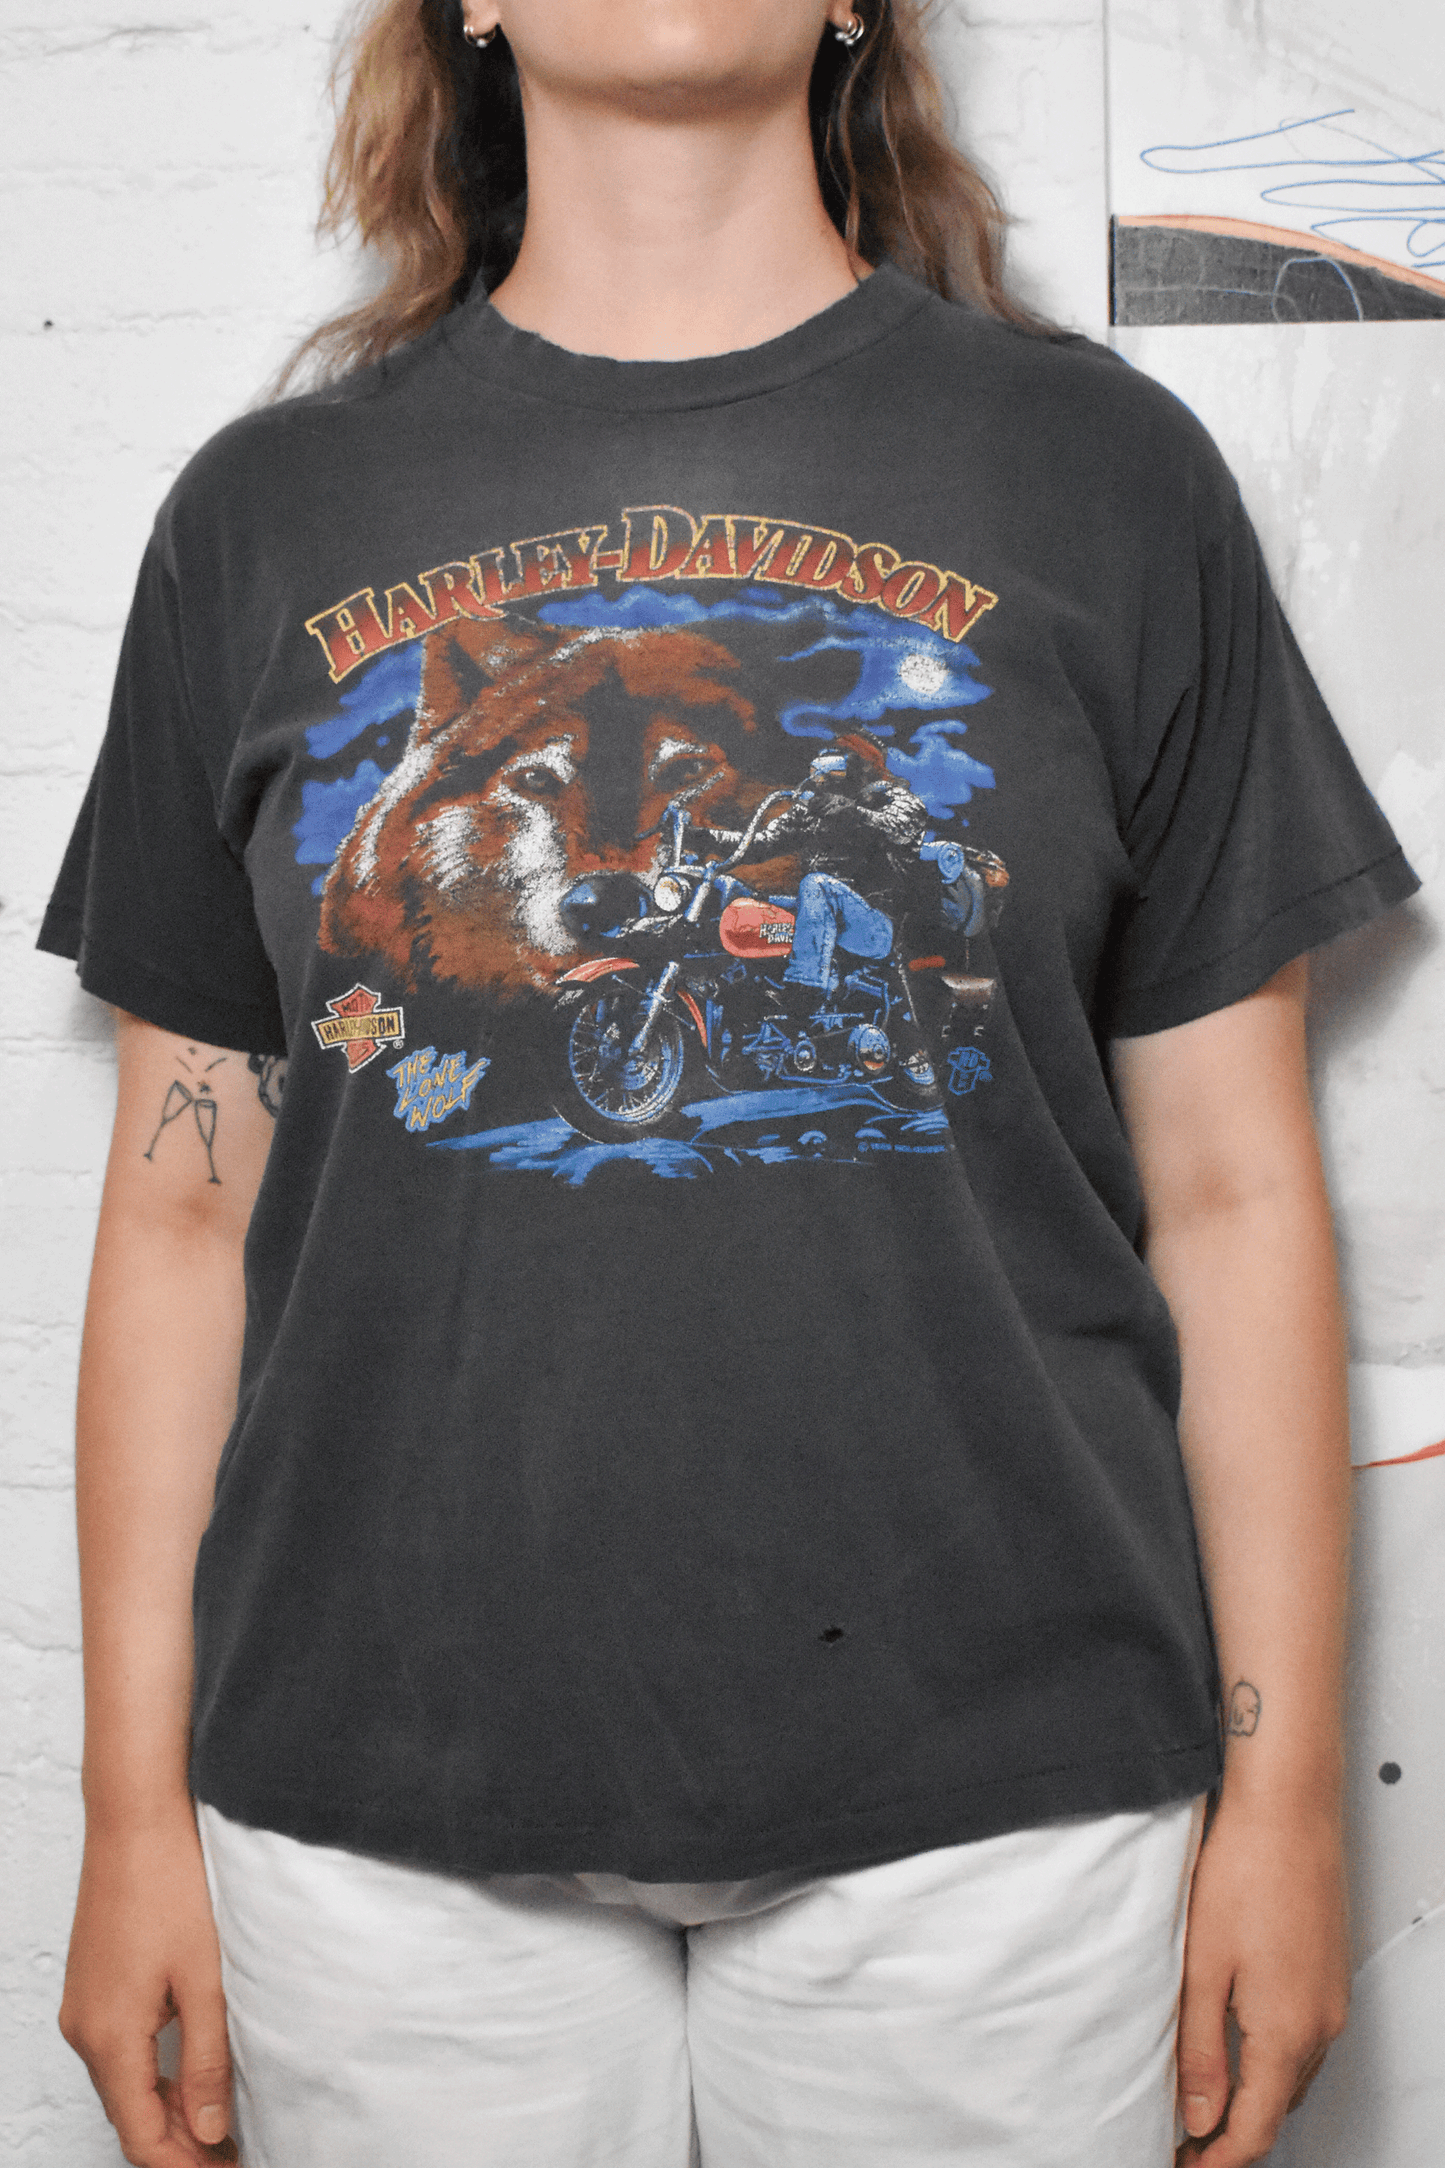 Vintage 1989 "The Lone Wolf" Harley Davidson Motorcycle T-shirt